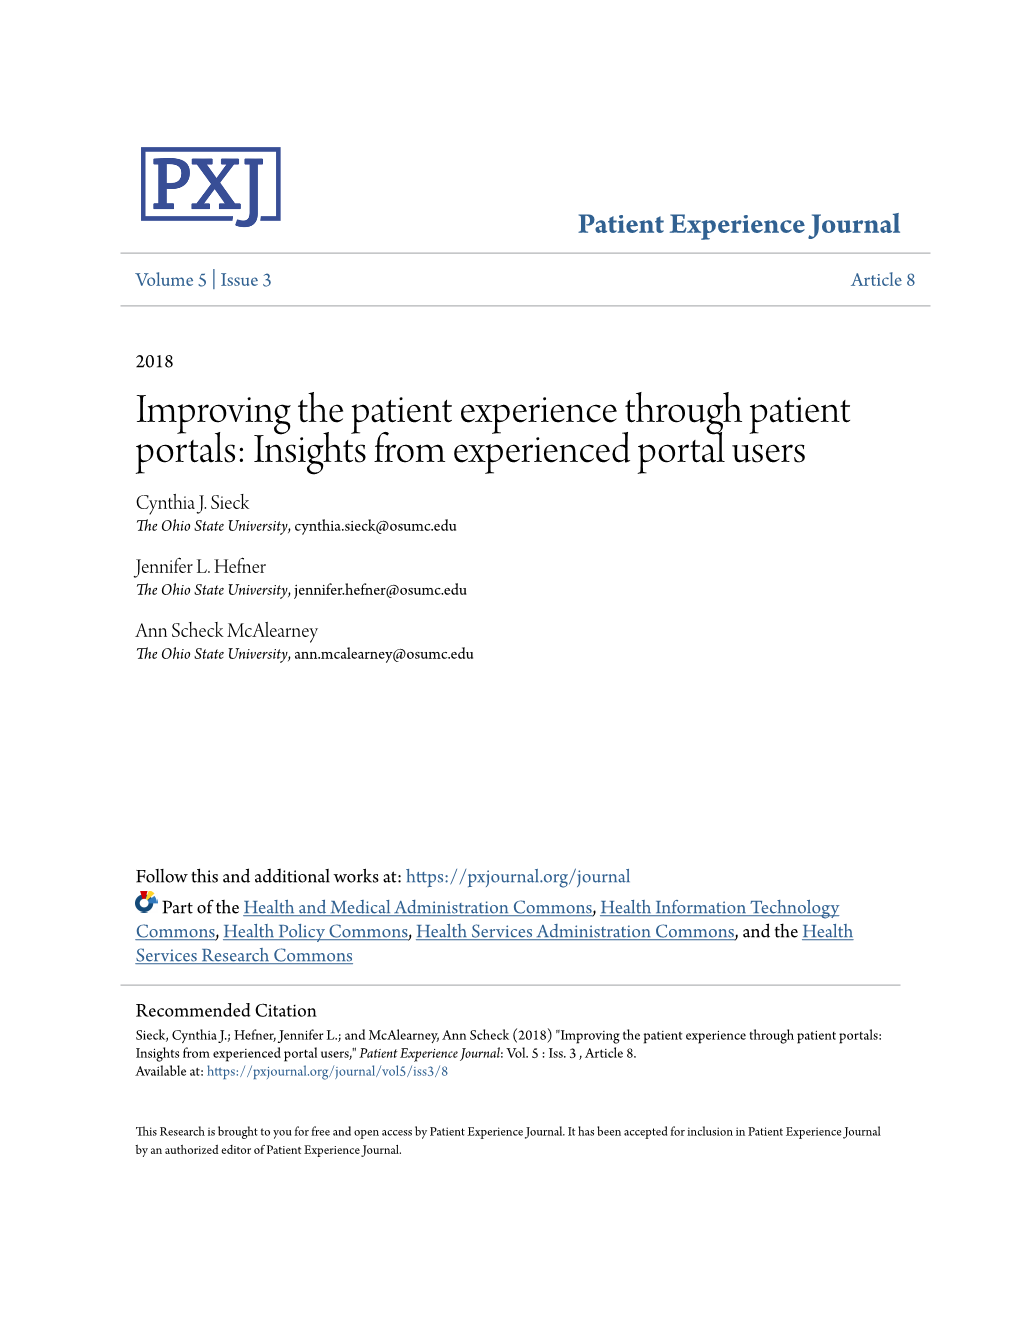 Improving the Patient Experience Through Patient Portals: Insights from Experienced Portal Users Cynthia J